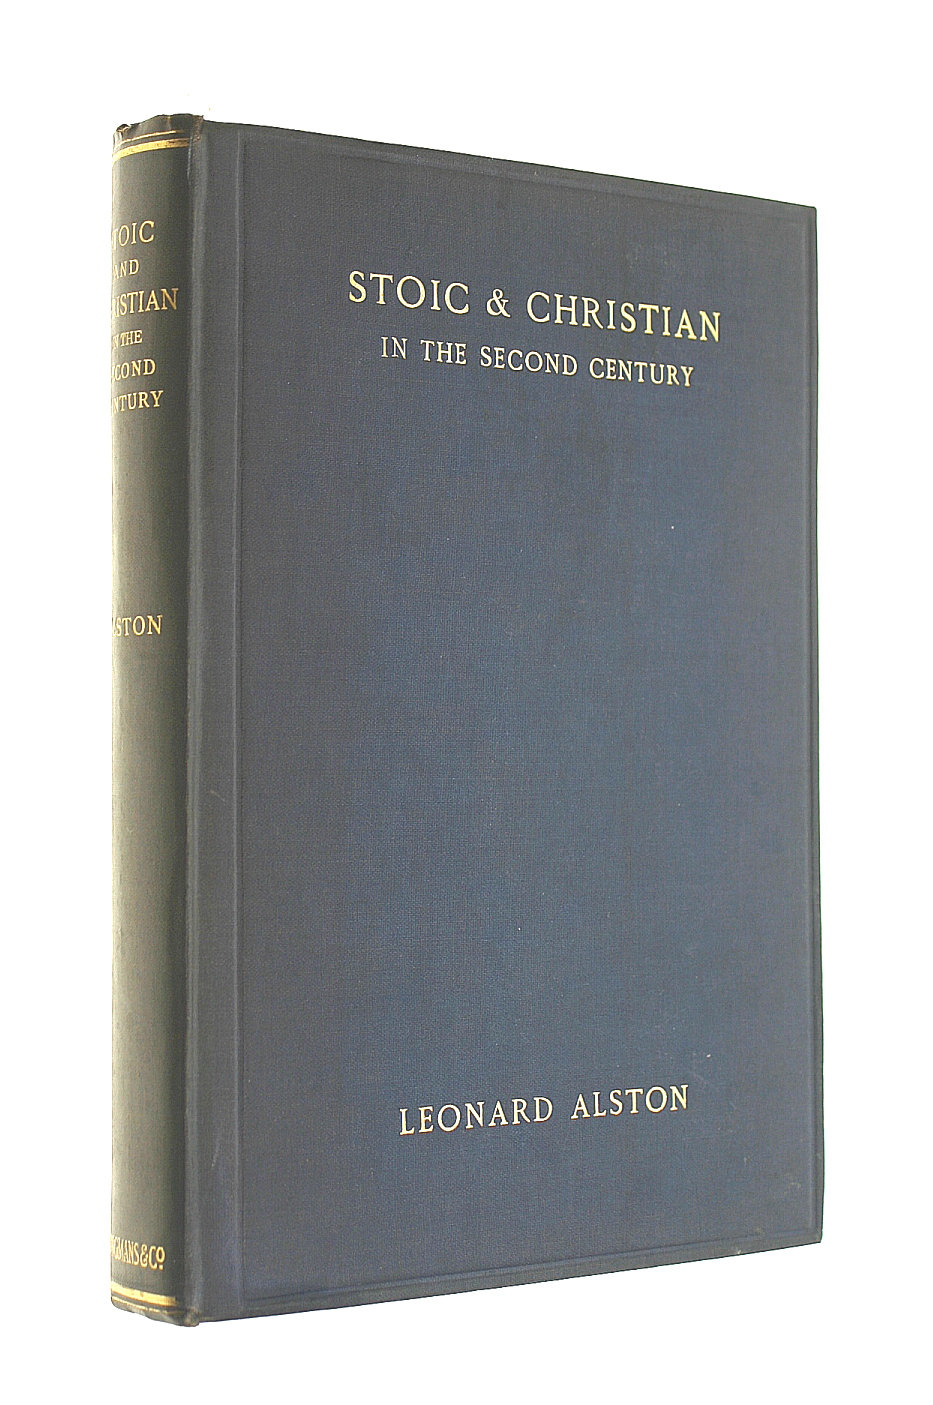 L ALSTON - Stoic and Christian in the second century : a comparison of the ethical teaching of Marcus Aurelius with that of contemporary and antecedent Christianity / by Leonard Alston 1906 [Hardcover]